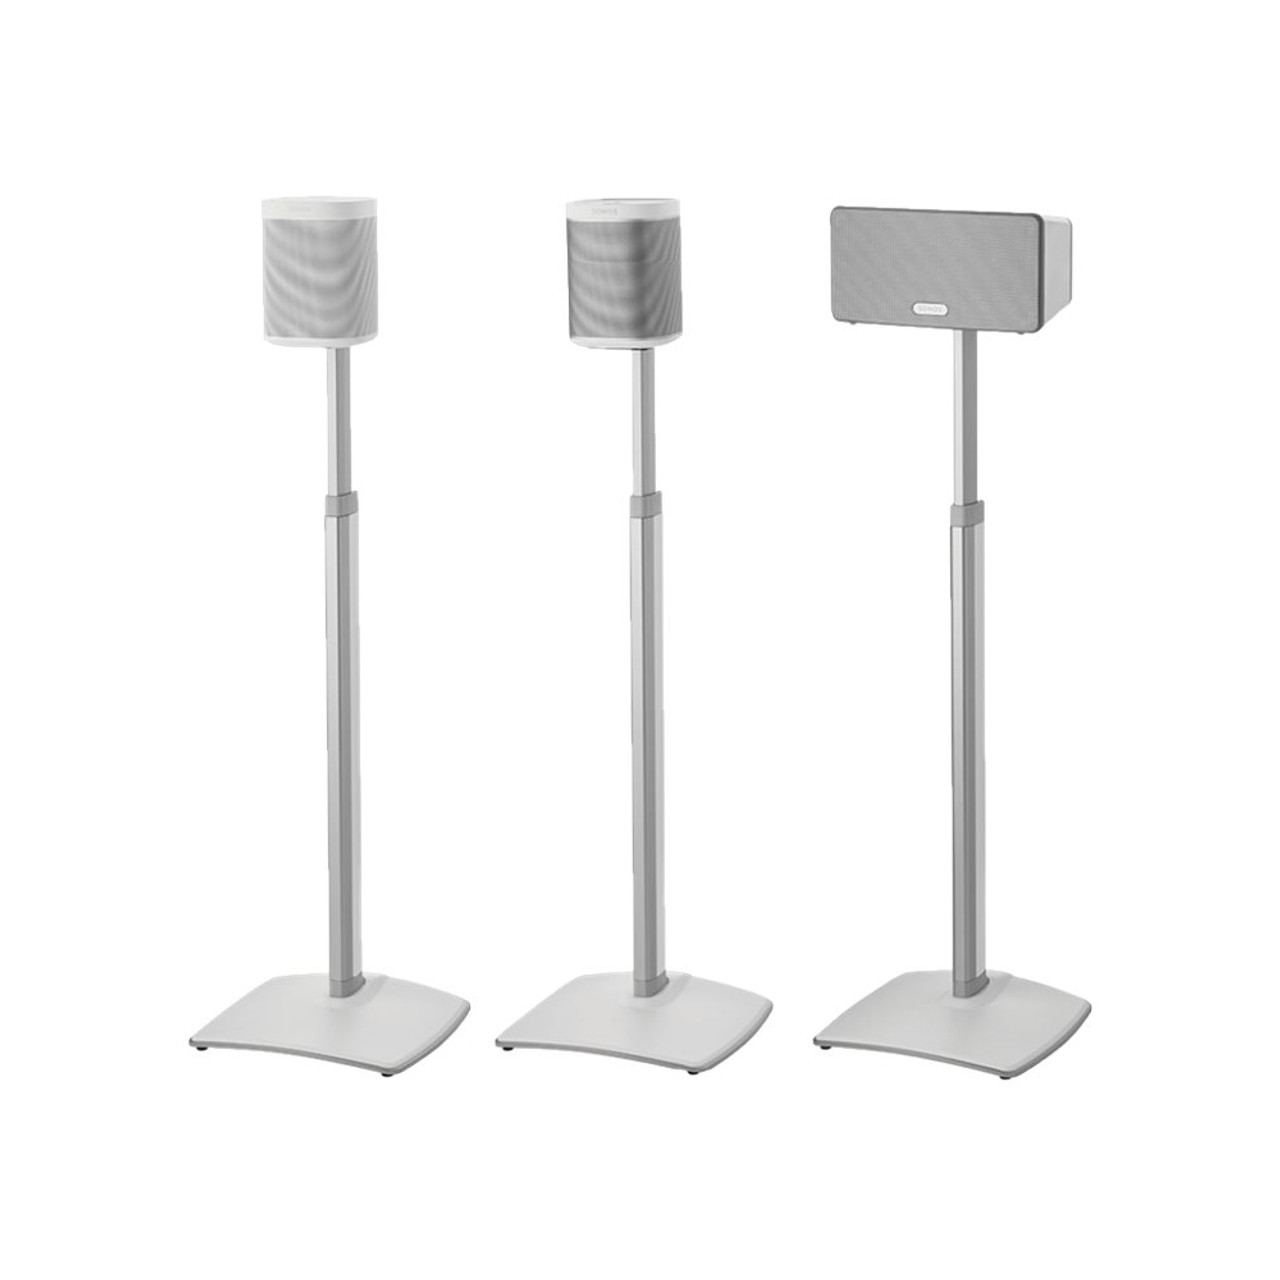 Sanus - Adjustable Height Speaker Stand for Sonos One, PLAY:1 and PLAY:3 Speakers - White